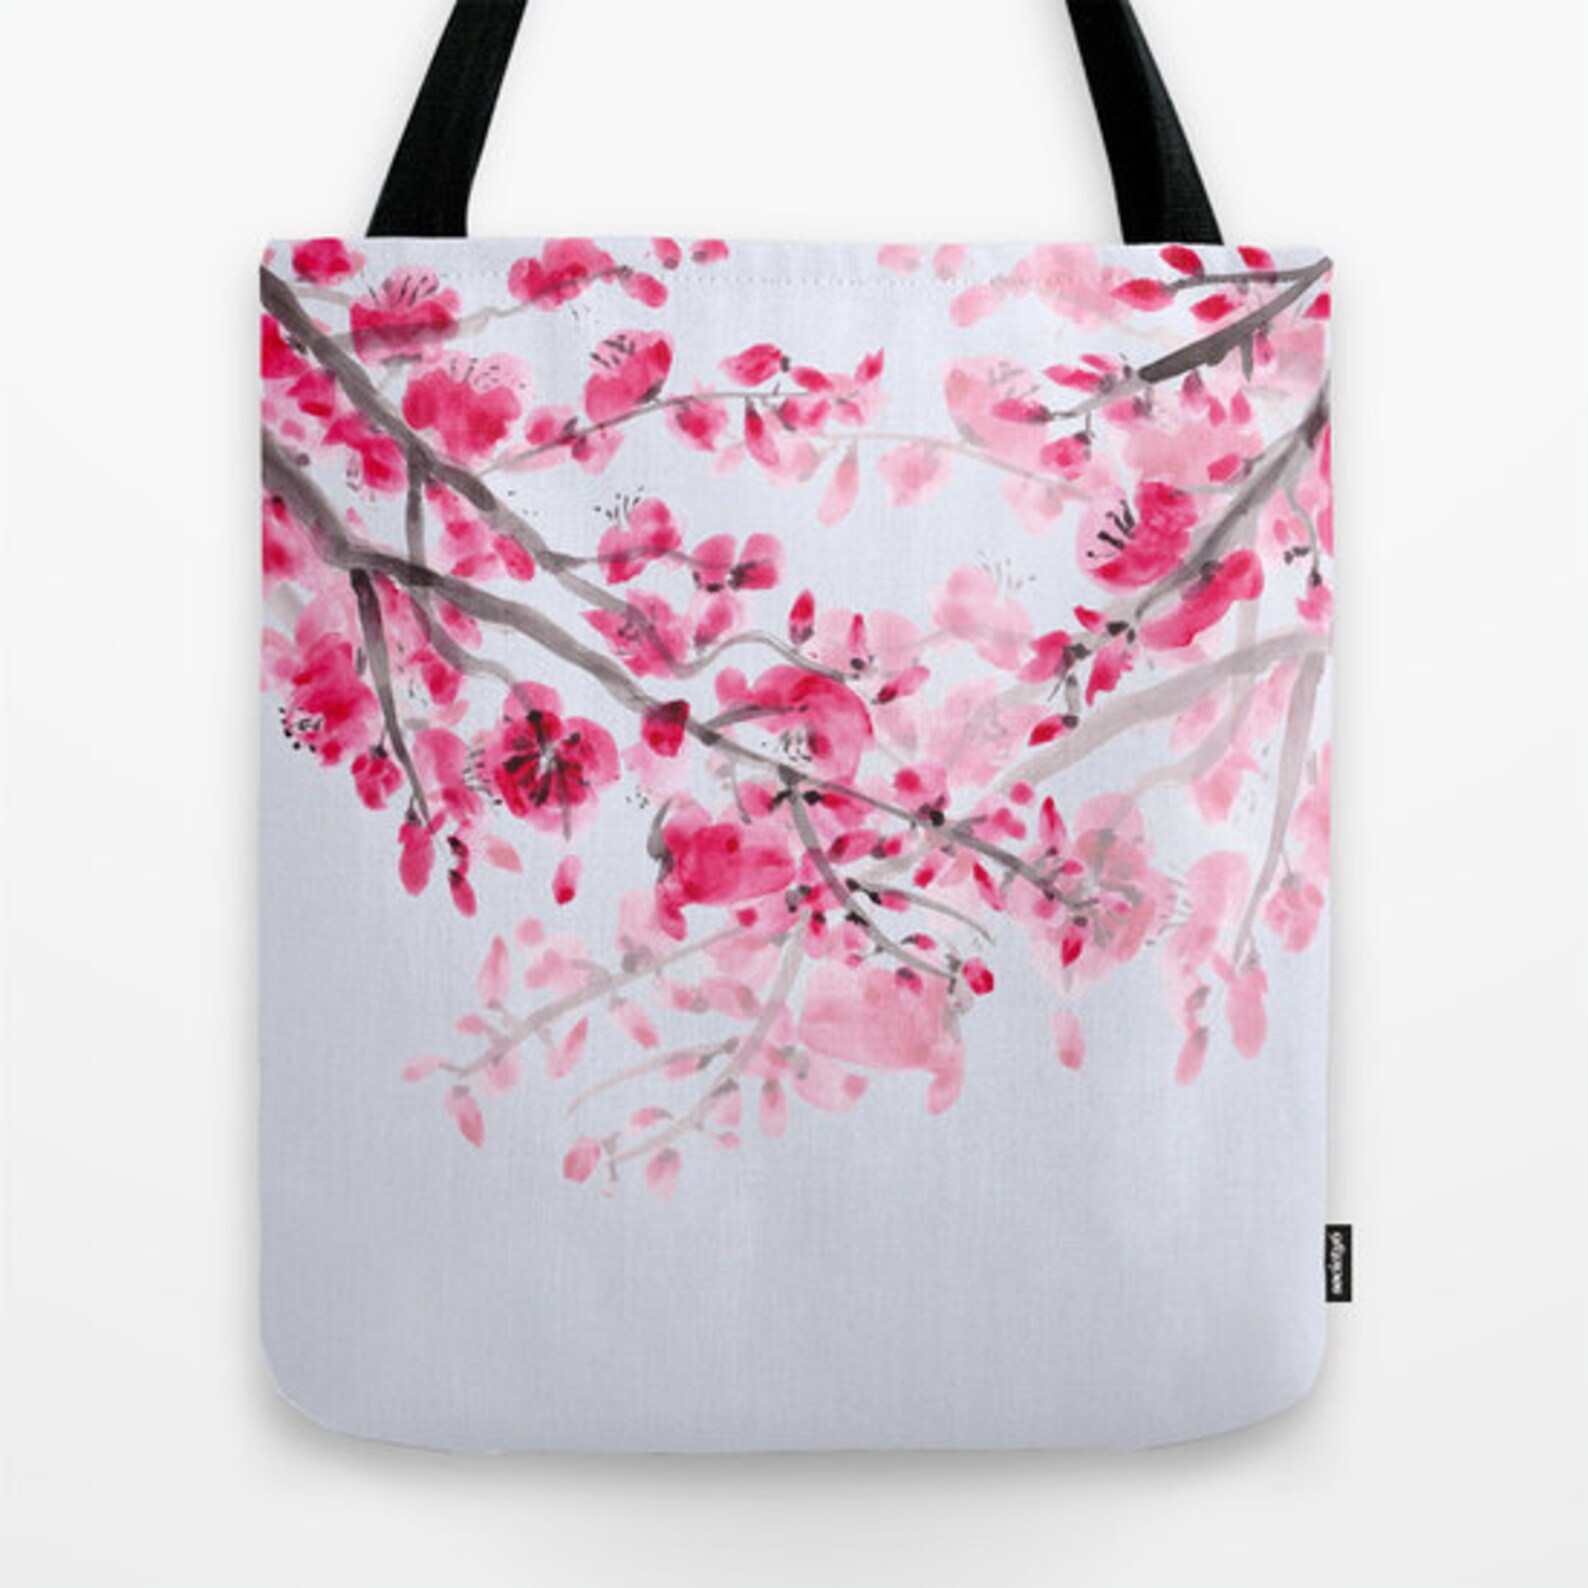 Cherry Blossom Tote Bag Pink delicate chic floral travel | Etsy